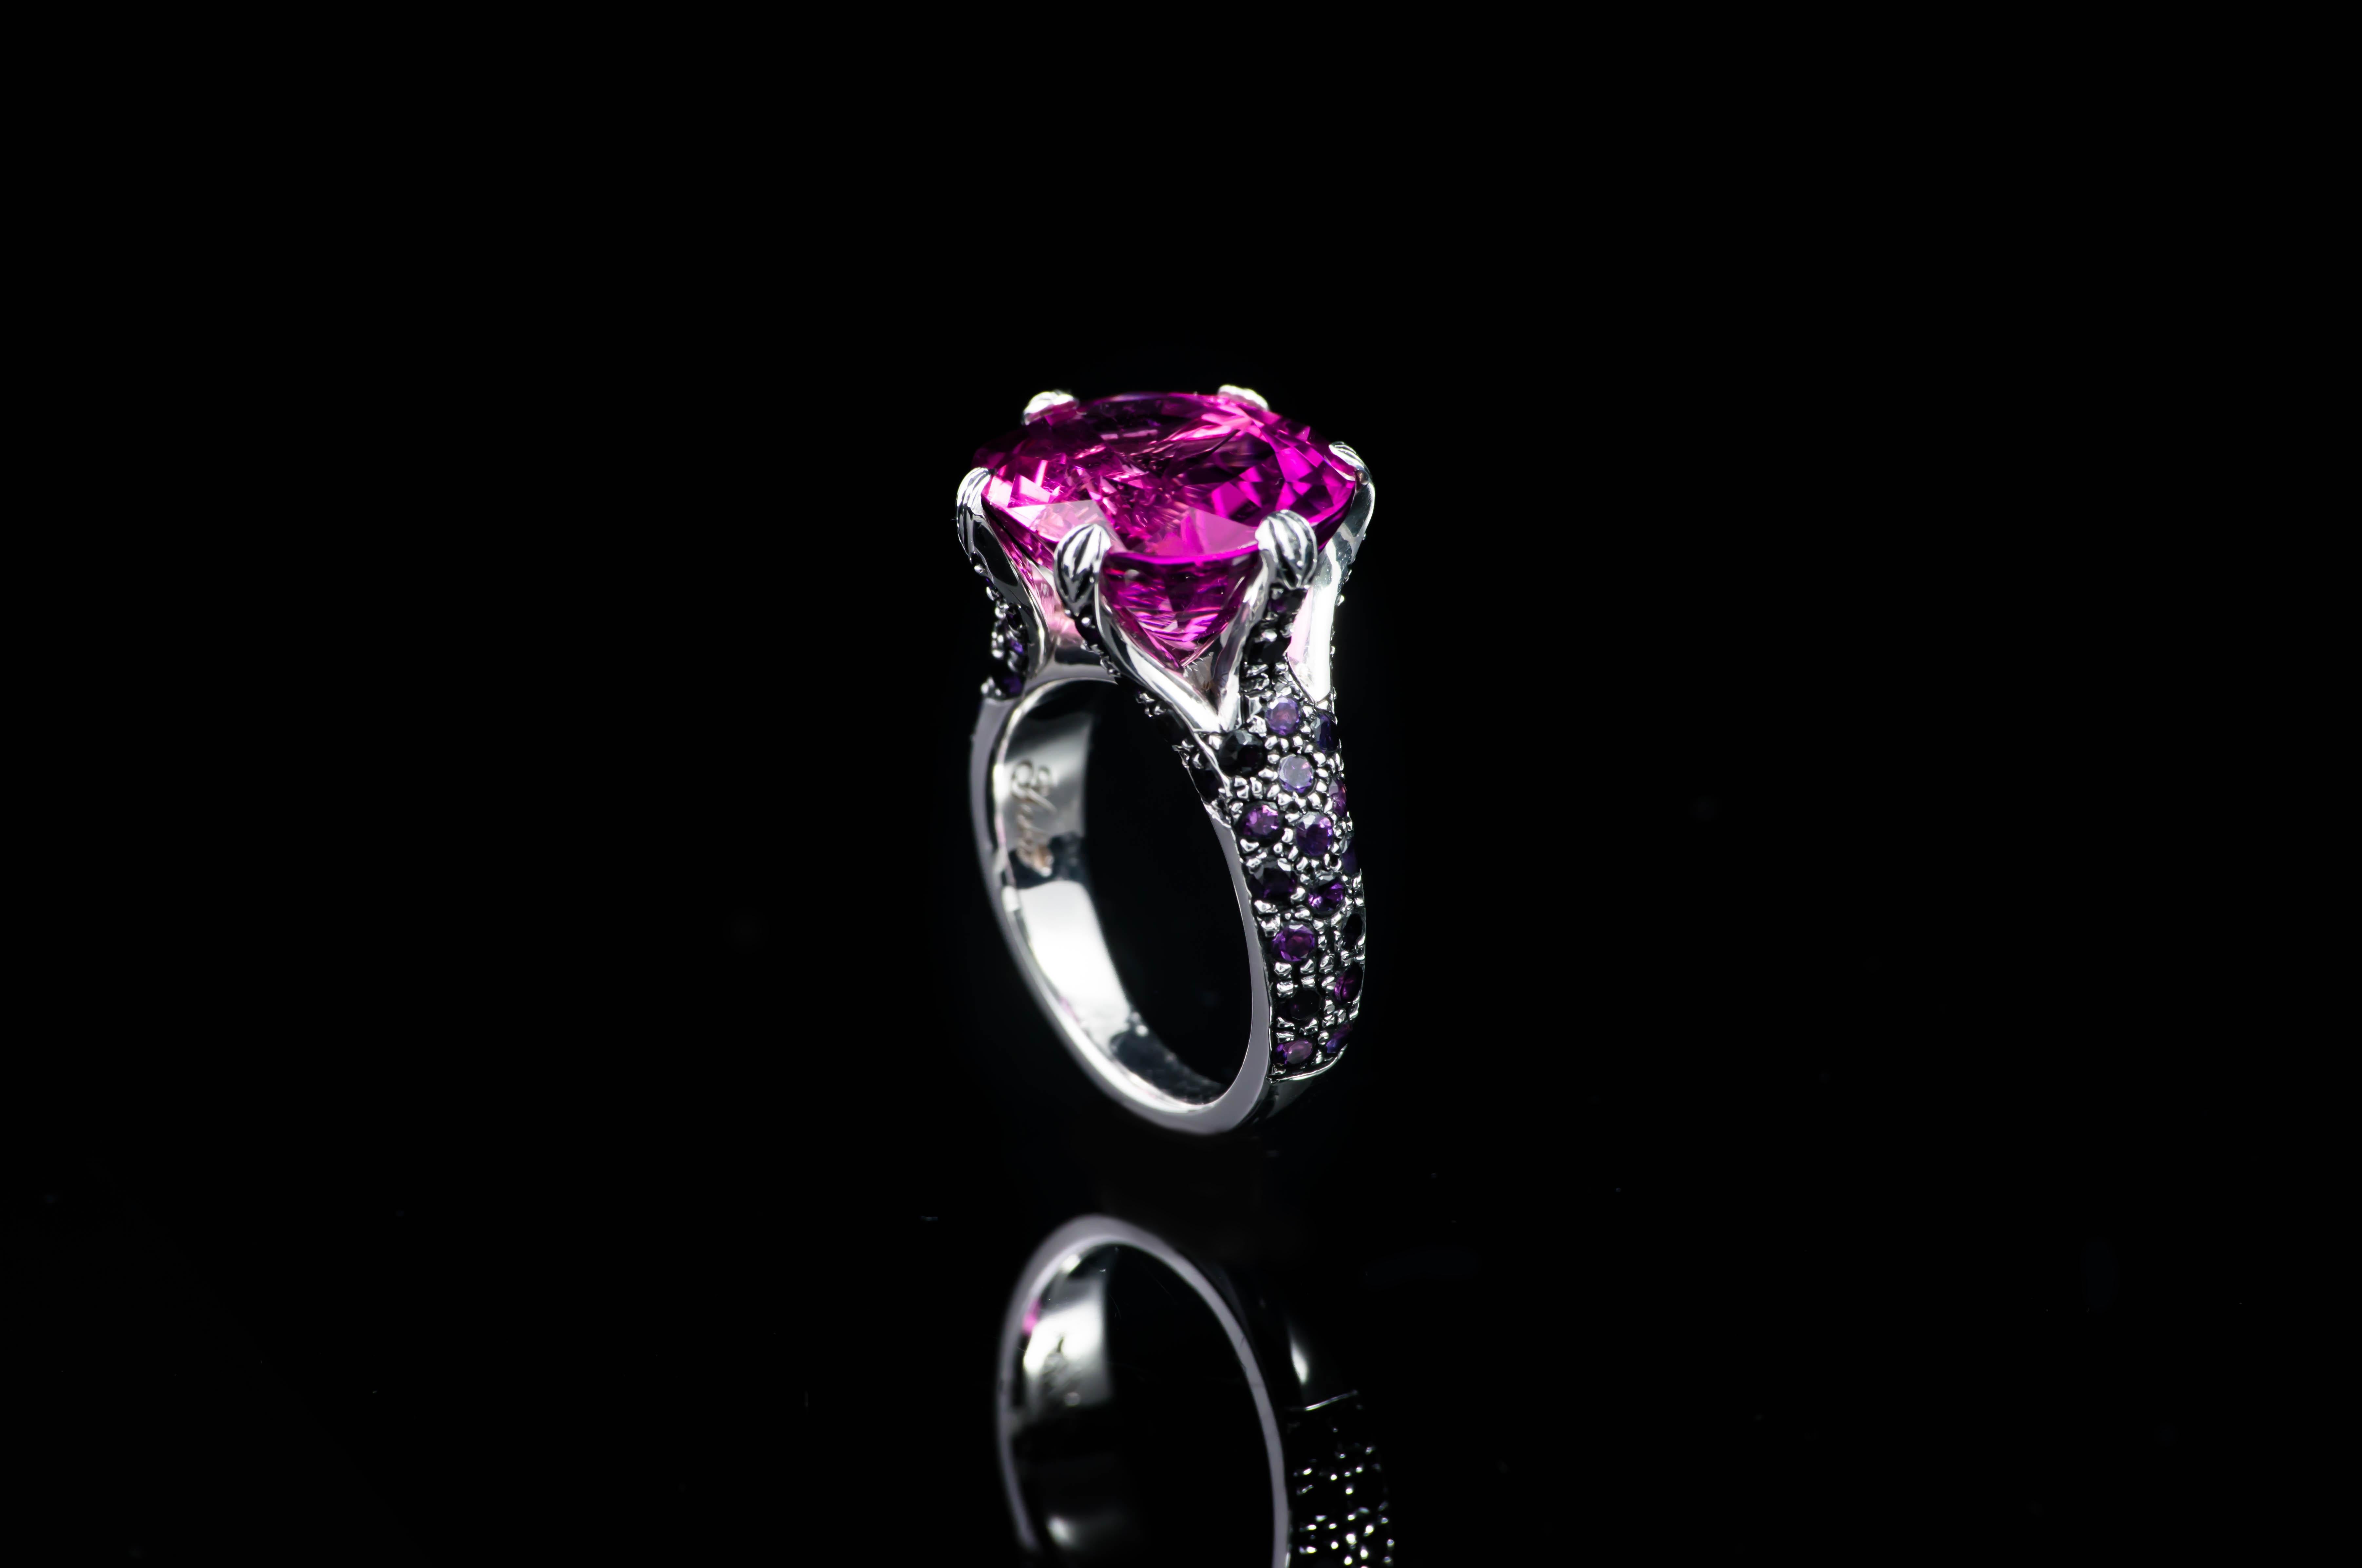 One-of-a-kind Ring features oval cut deep Fuchsia Tourmaline with deep Amethyst pave work on the shank for a more dramatic, glamorous take on the statement ring. From Pure Life Collection, inspired by Cherry Blossom tree with clusters of dark-pink